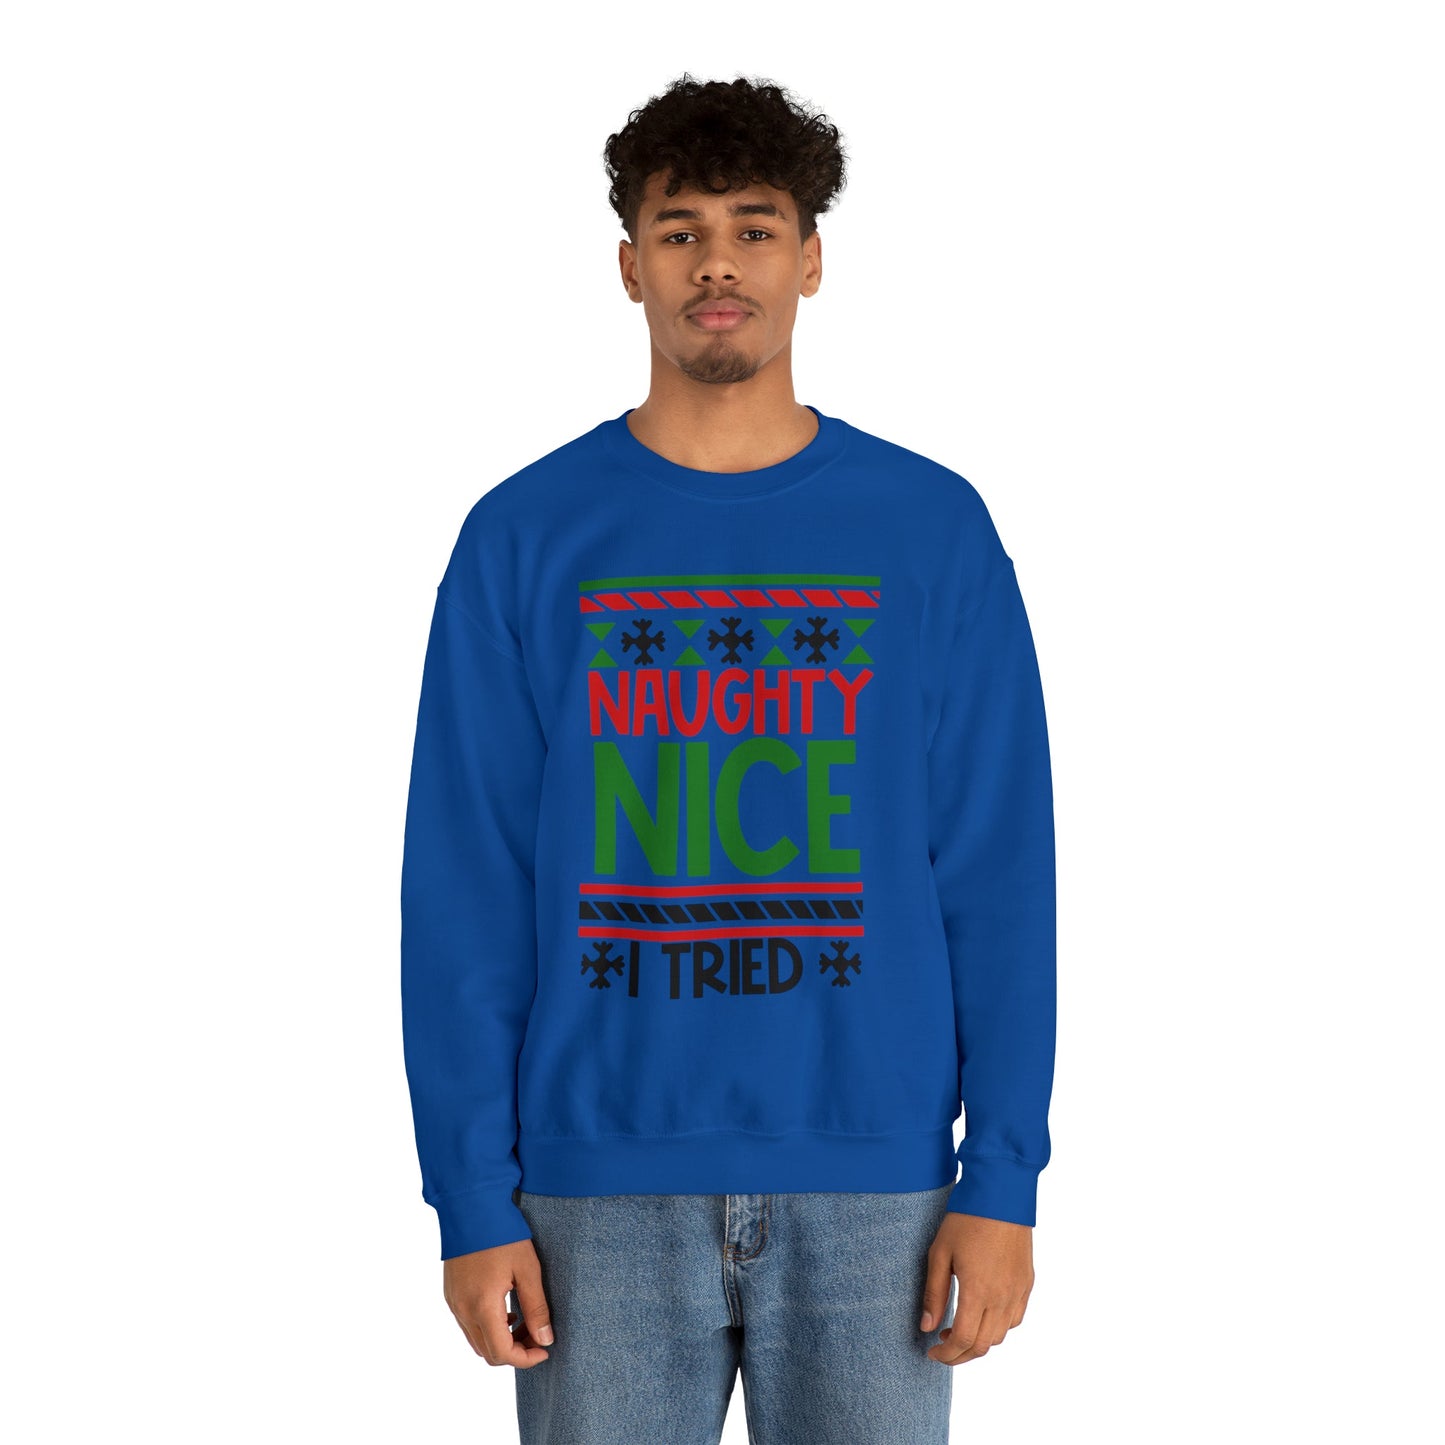 Get trendy with Naughty or Nice I tied ugly Christmas sweater - Sweatshirt available at Good Gift Company. Grab yours for $29.99 today!